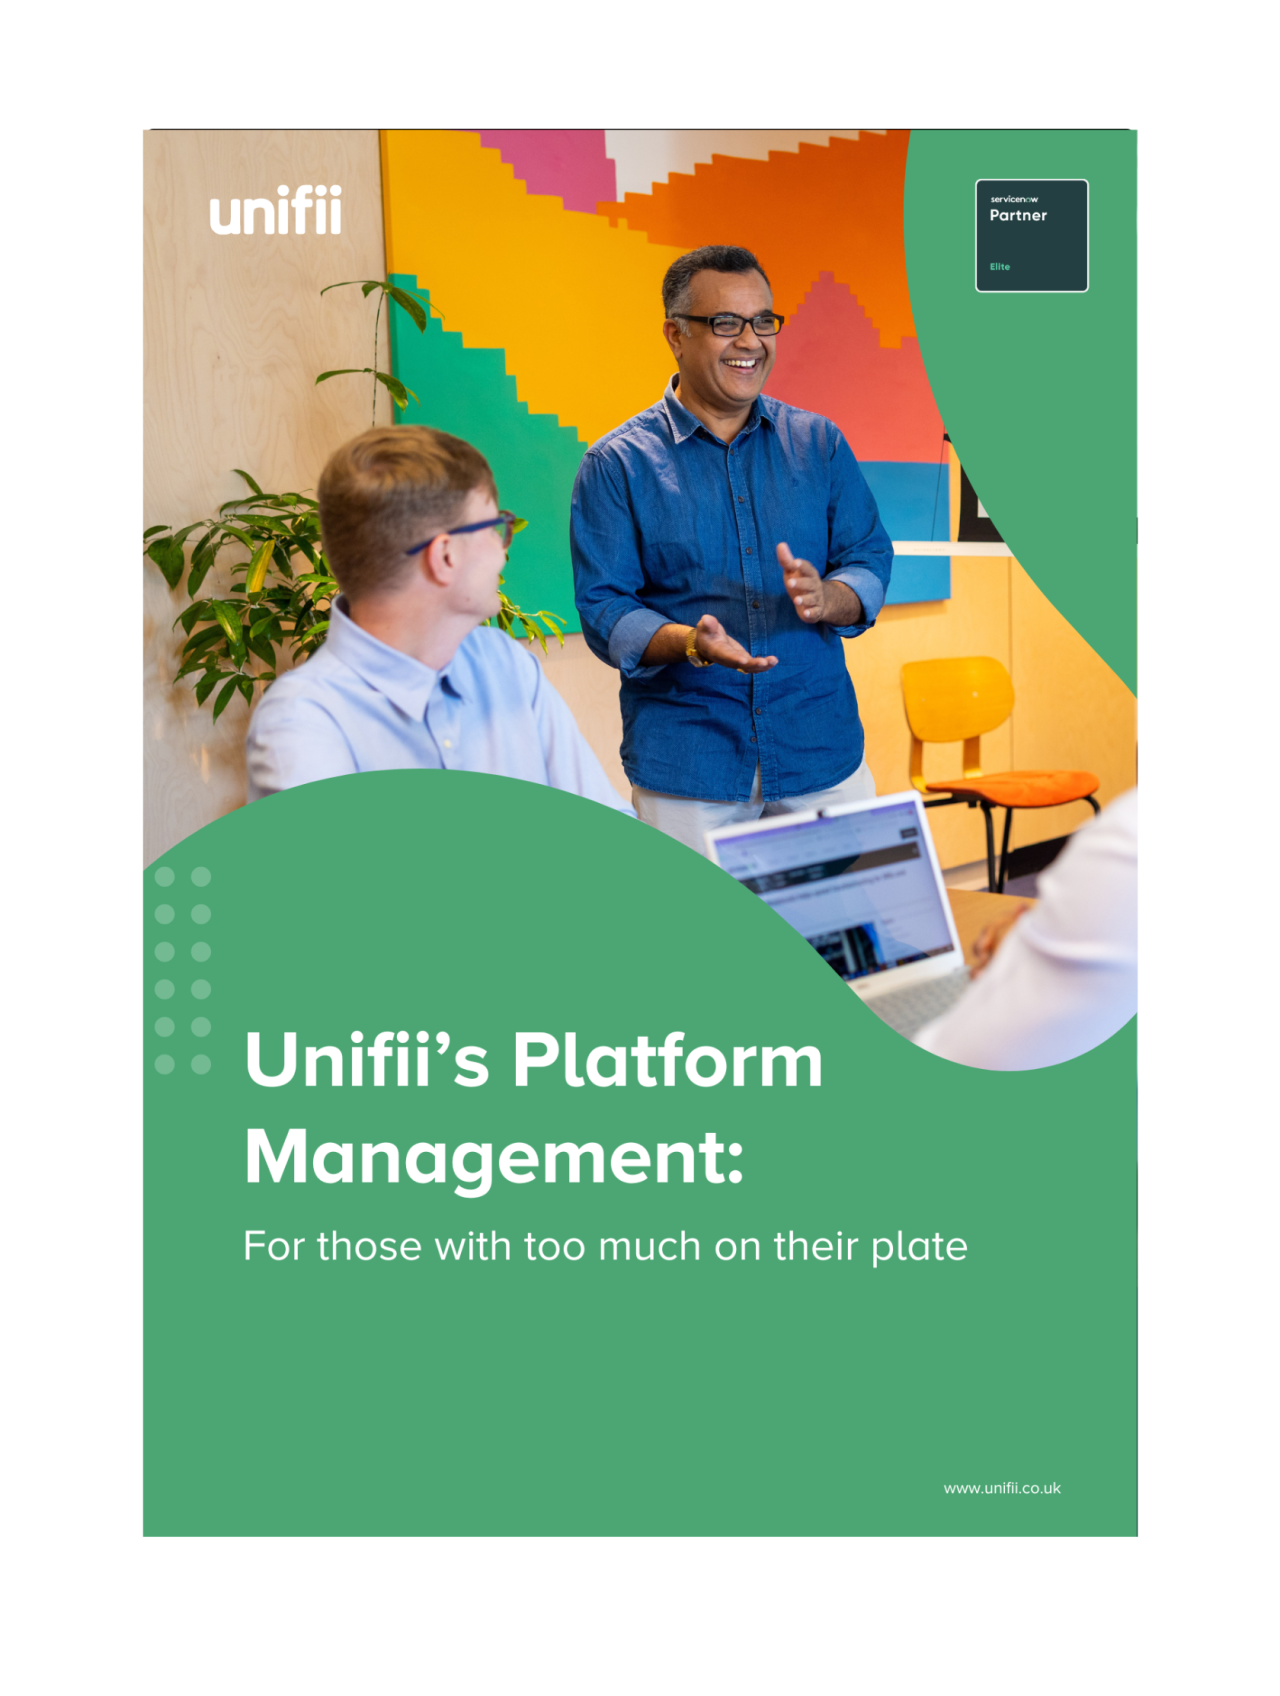 Unifii’s Platform Management: For those with too much on their plate.